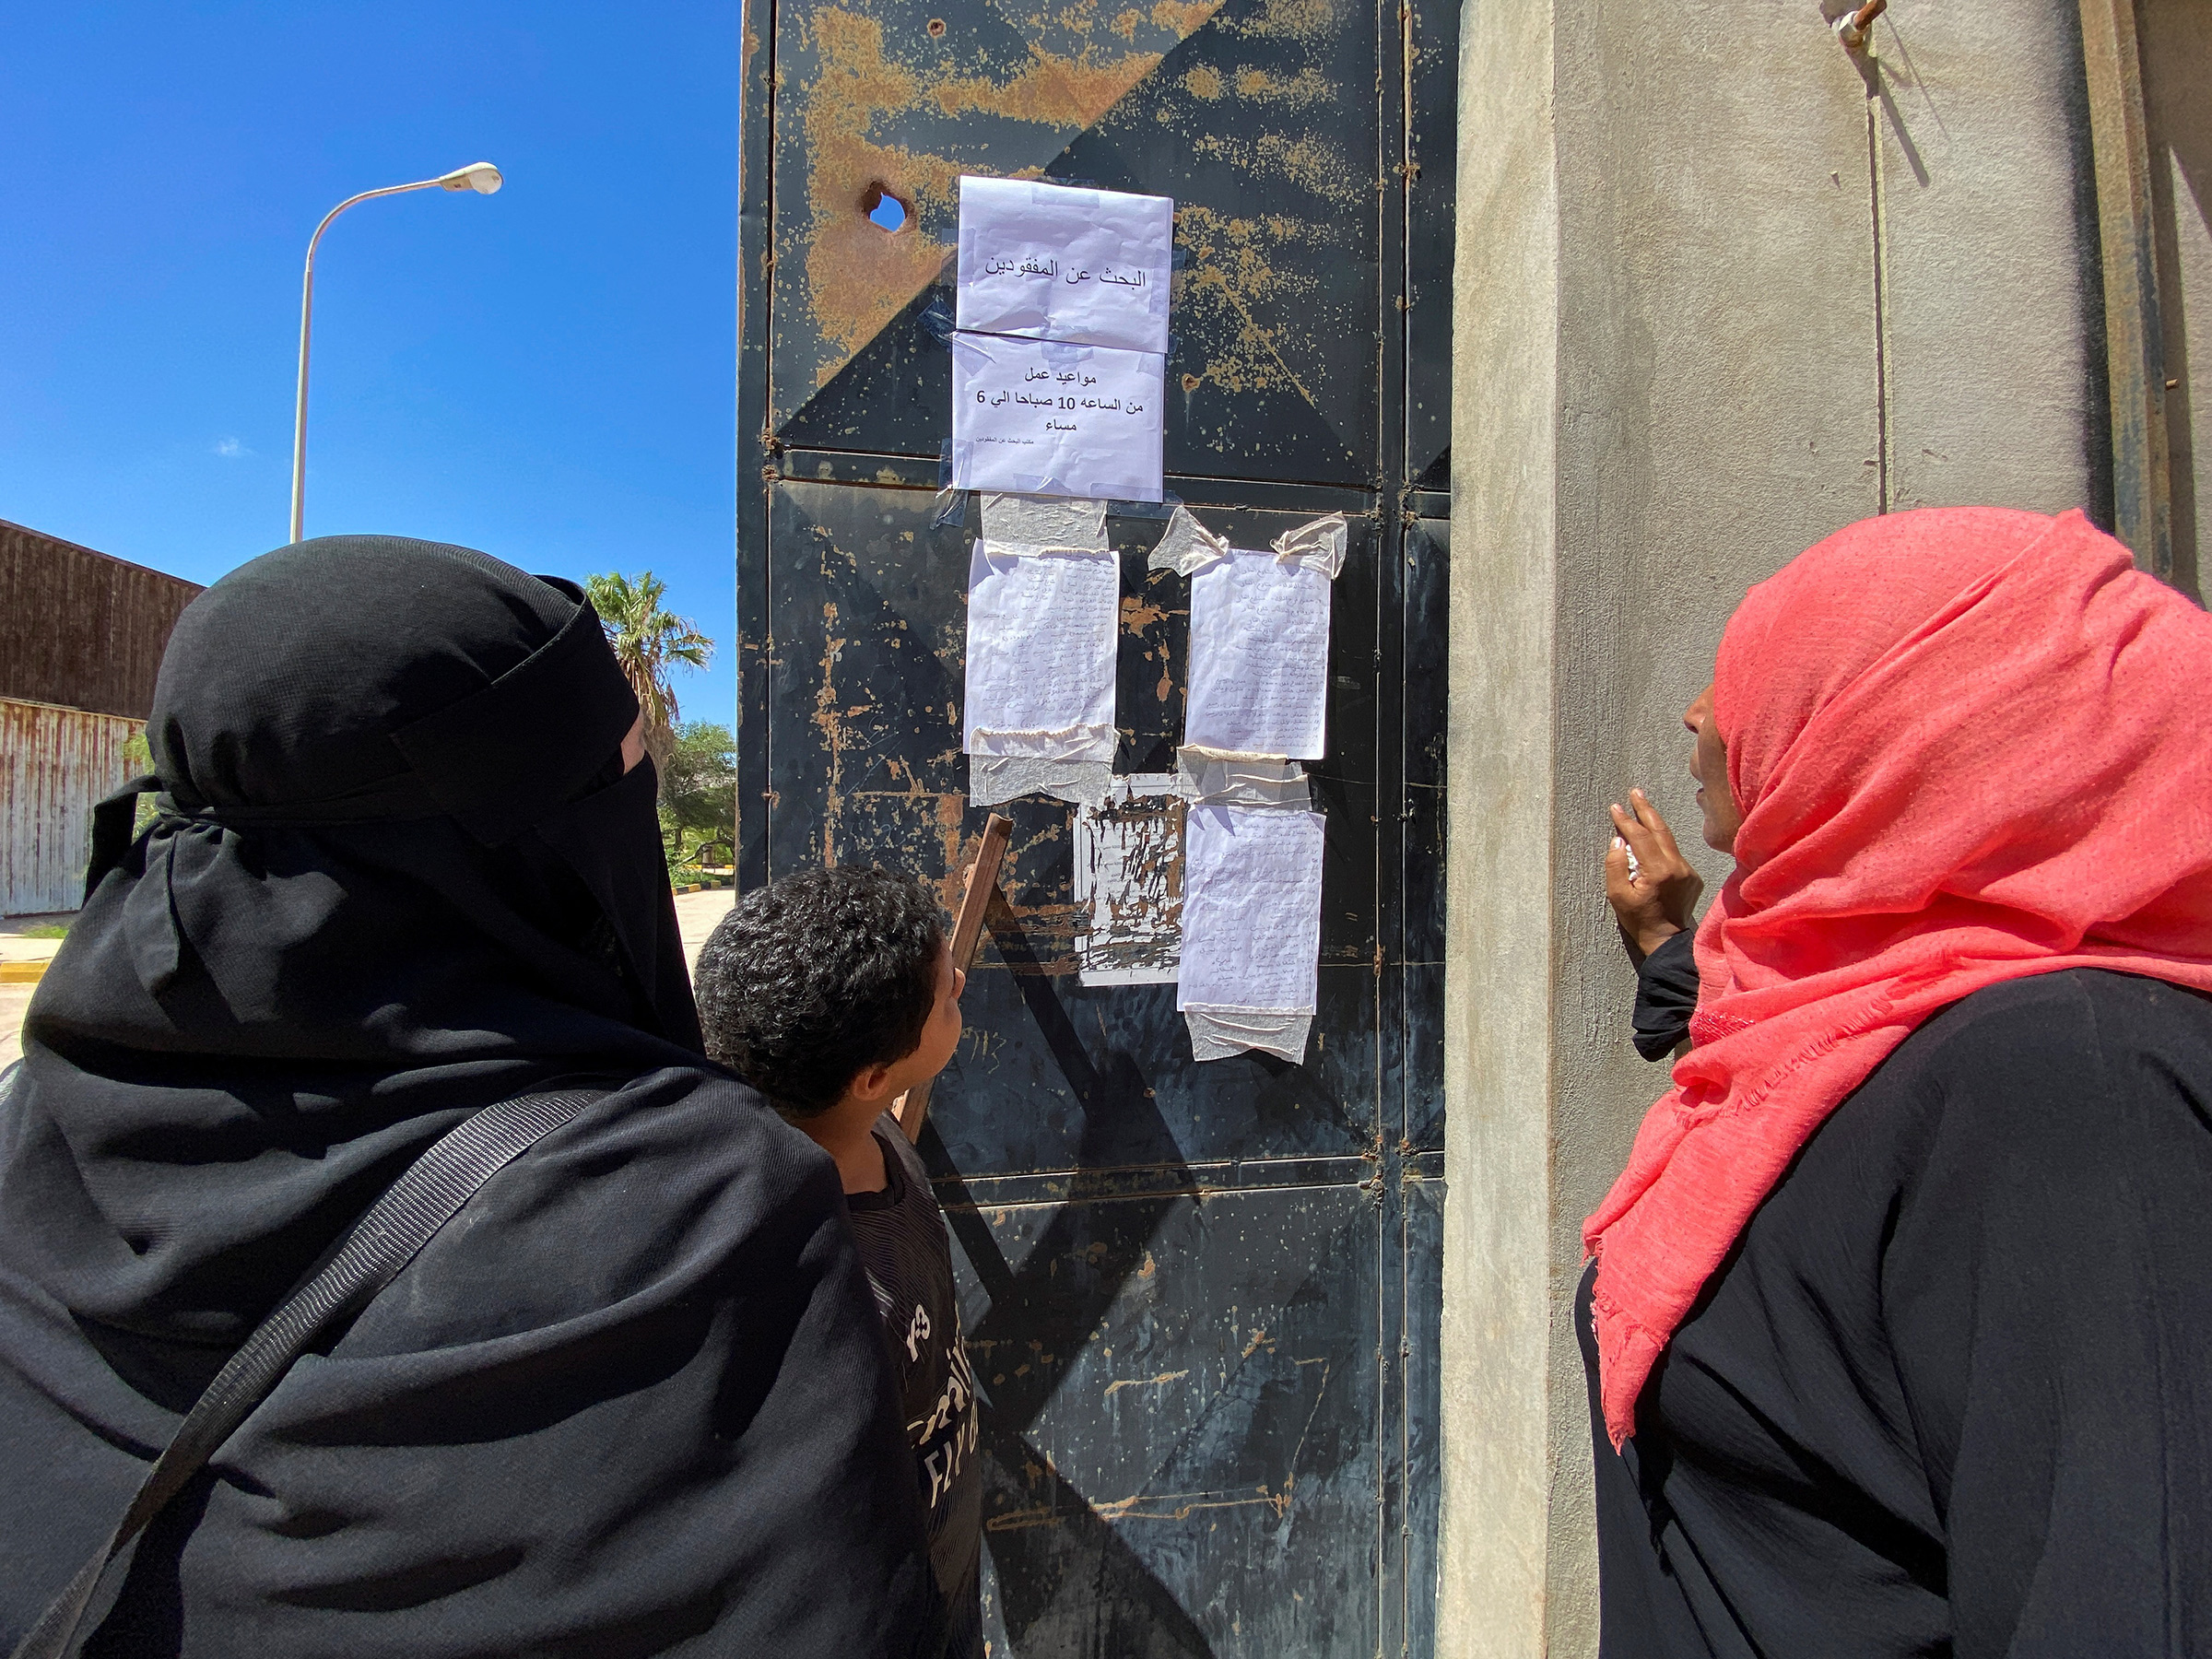 People look at the list of missing people in the aftermath of the floods in Derna on Sept. 14.